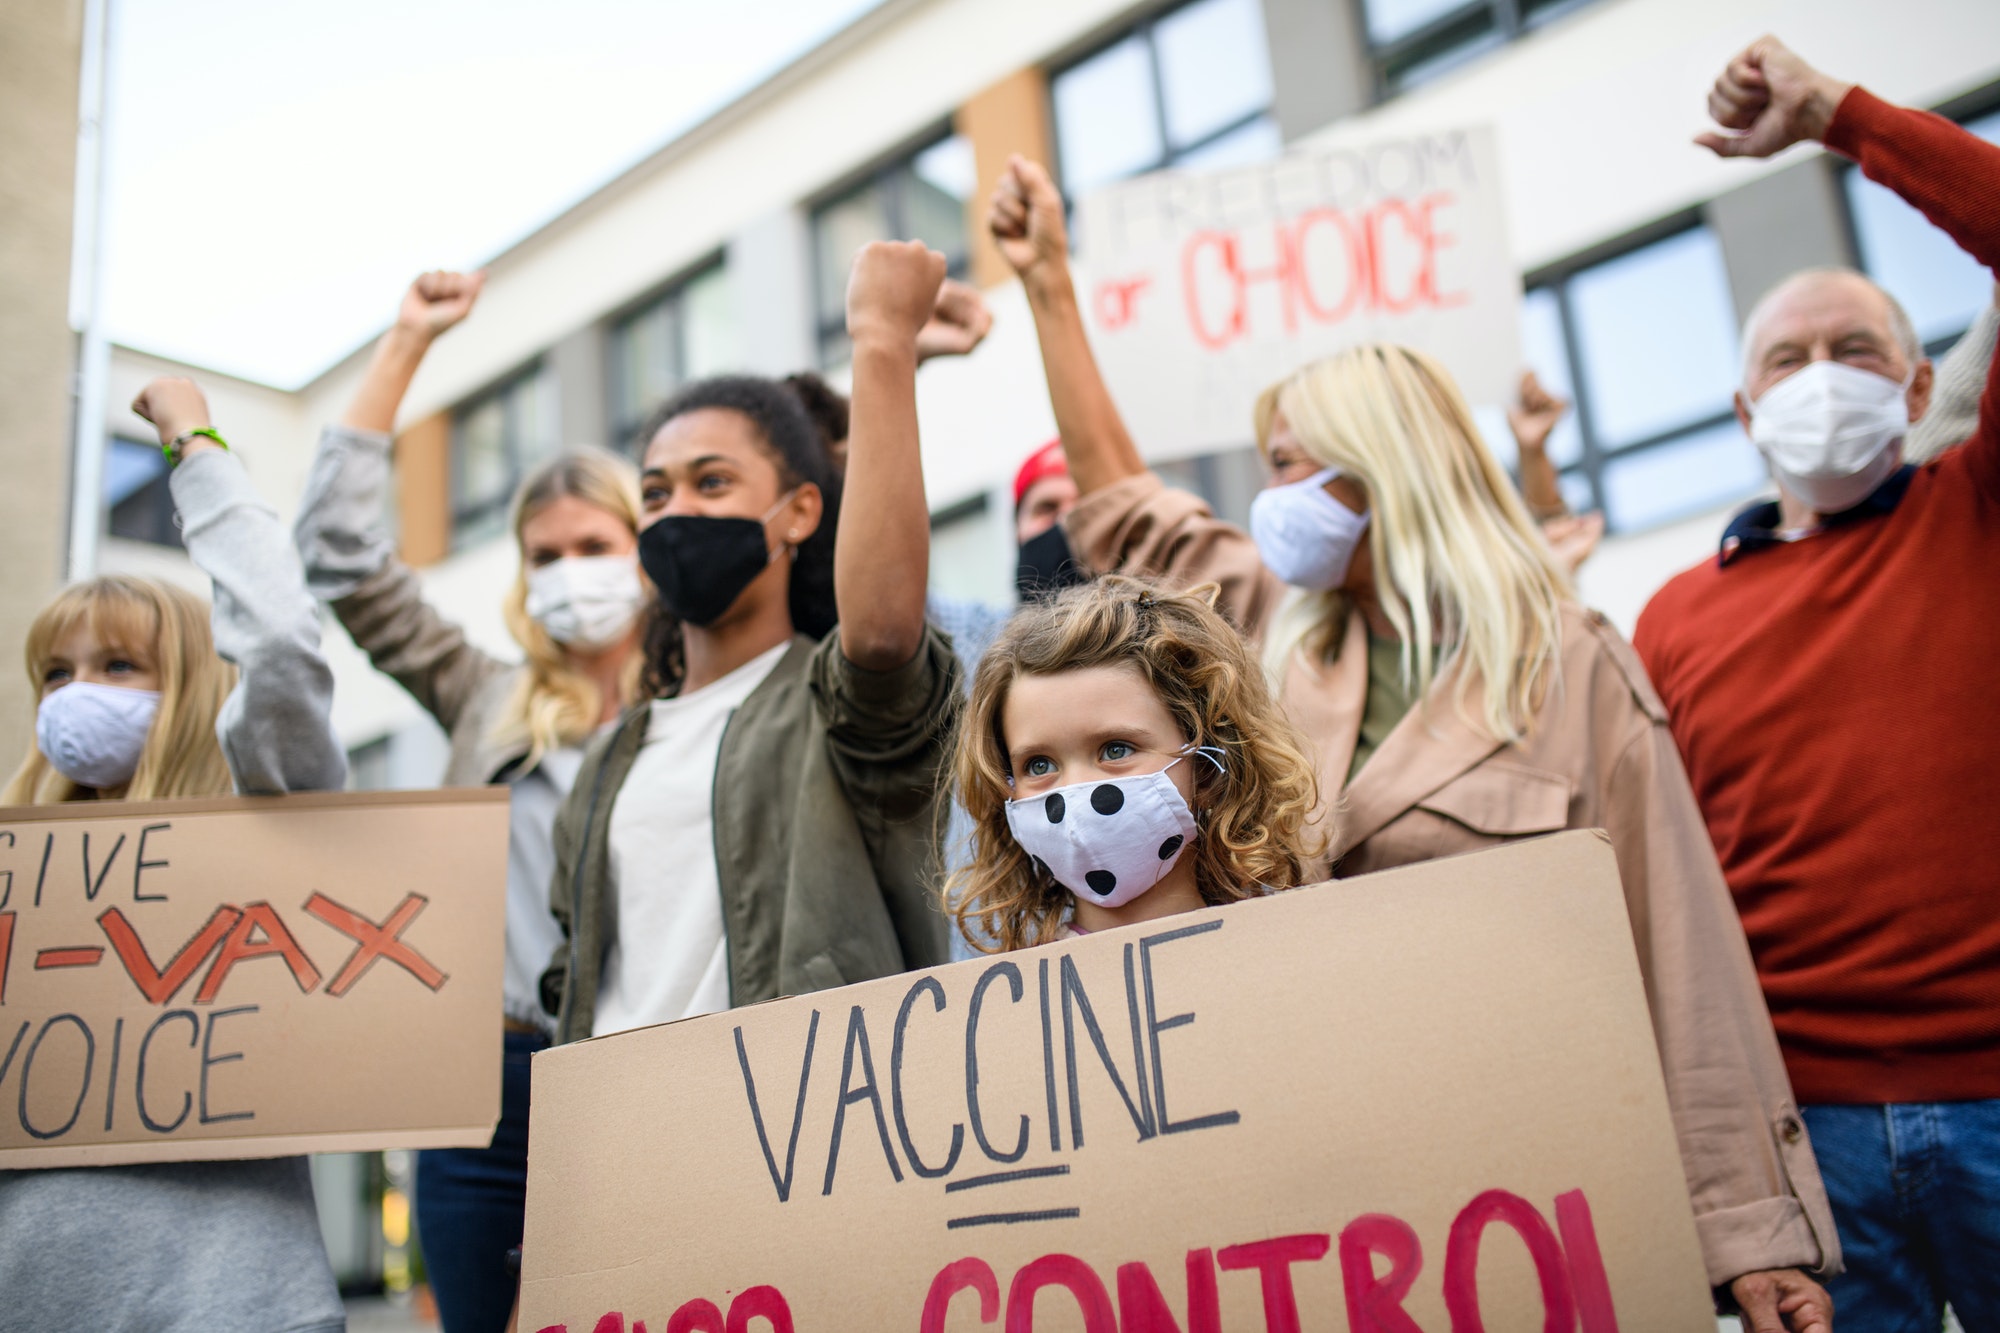 People with placards and posters on public demonstration, no covid vaccine concept